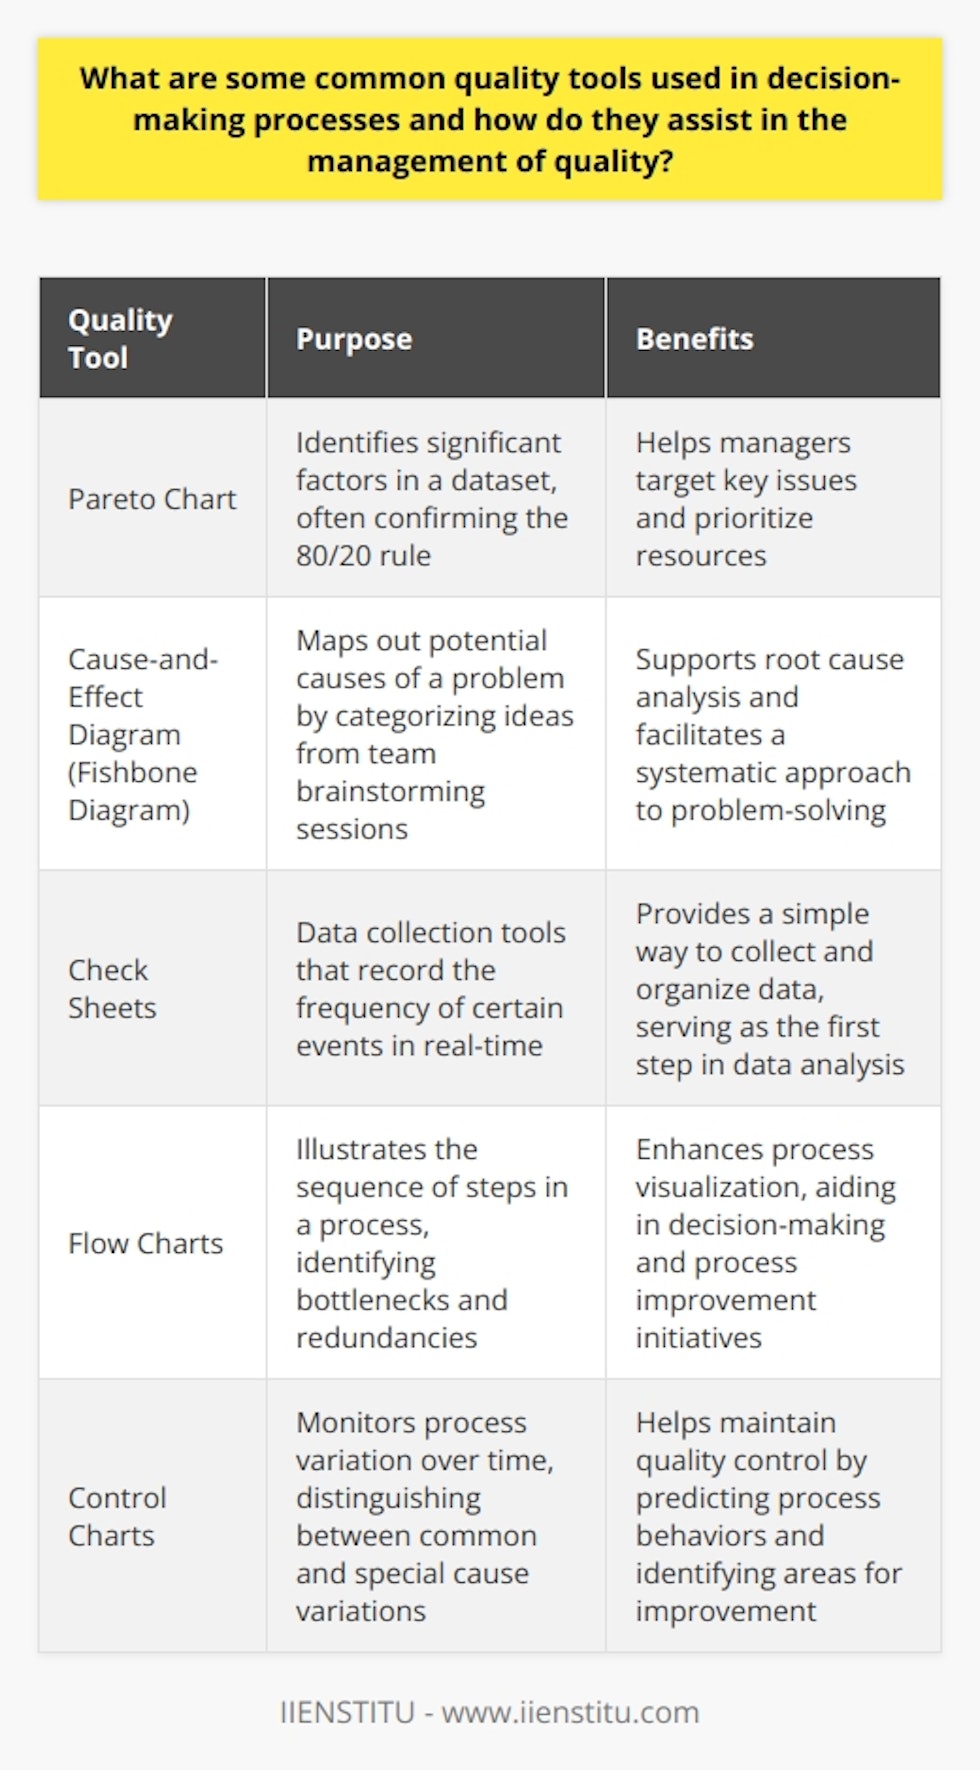 Quality Tools in Decision-Making Decision-making in quality management is critical. Managers often rely on specific quality tools. These tools help make informed decisions. They base their choices on data. Here are several common quality tools. Pareto Chart Firstly, we have the Pareto Chart. It reveals the significant factors in a dataset. Often, it confirms the 80/20 rule. This rule states that 80% of problems arise from 20% of causes. Managers use it to target key issues. Cause-and-Effect Diagram Also known as a fishbone diagram. It maps out potential causes of a problem. Teams brainstorm the reasons for a quality issue. They group ideas under categories. This supports root cause analysis. Check Sheets Check sheets are data collection tools. They record the frequency of certain events. These sheets provide a simple way to collect real-time data. Often, they are the first step in data analysis. Flow Charts Here we have a tool that maps out a process. Flow charts show the sequence of steps in a process. They help identify bottlenecks and redundancies. Clear process visualization aids decision-making. Histograms Histograms show the distribution of variable data. They are a type of bar chart. Users can see patterns and variances in data. Insights on data spread support quality improvement efforts. Control Charts Control charts monitor process variation over time. They distinguish between common and special cause variations. By tracking these, managers can predict process behaviors. This helps maintain quality control. Scatter Diagrams These illustrate the relationship between two variables. Scatter diagrams depict correlation and patterns. They guide the investigation into possible causal relationships. In essence , these tools illuminate various aspects of quality management. They make complex data understandable. Facilitate data-driven decisions. Enhance problem-solving efficiency. Ensure focus on the right areas. Quality tools are indispensable in high-quality decision-making processes. Using them correctly is a skill all quality managers must hone.